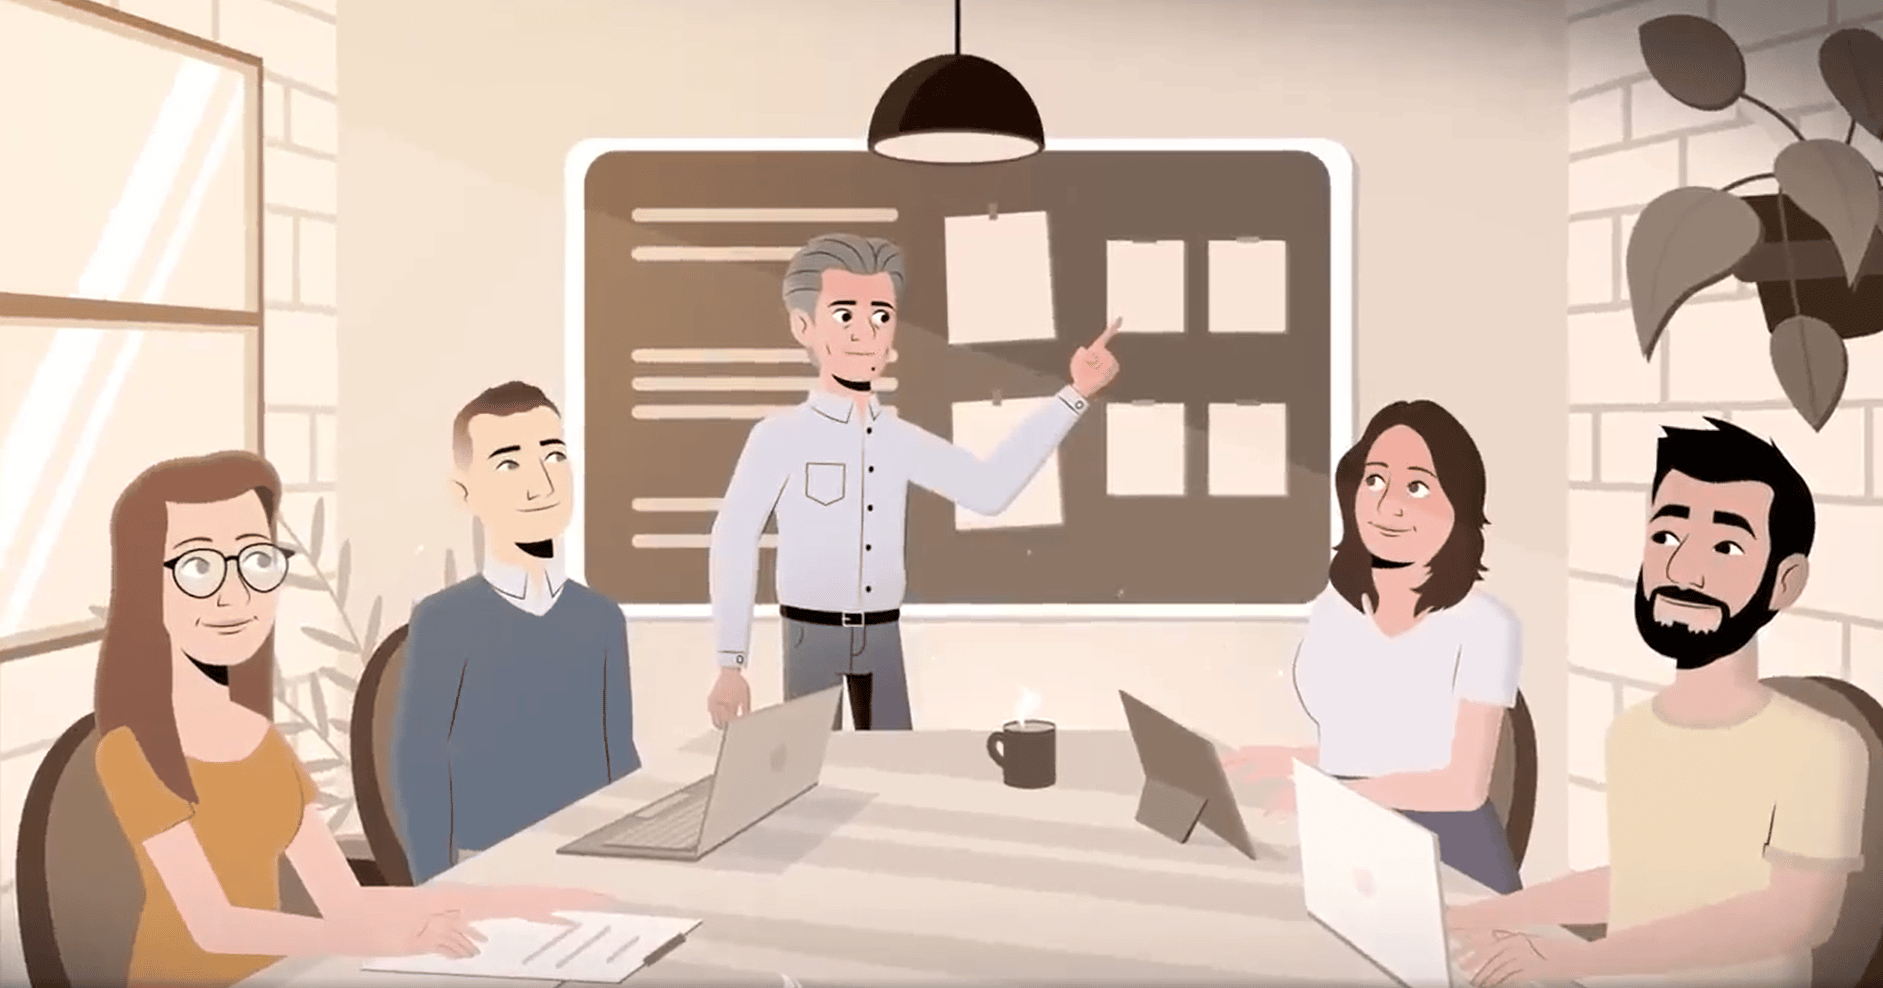 Telling Our Founder’s Story in Animation